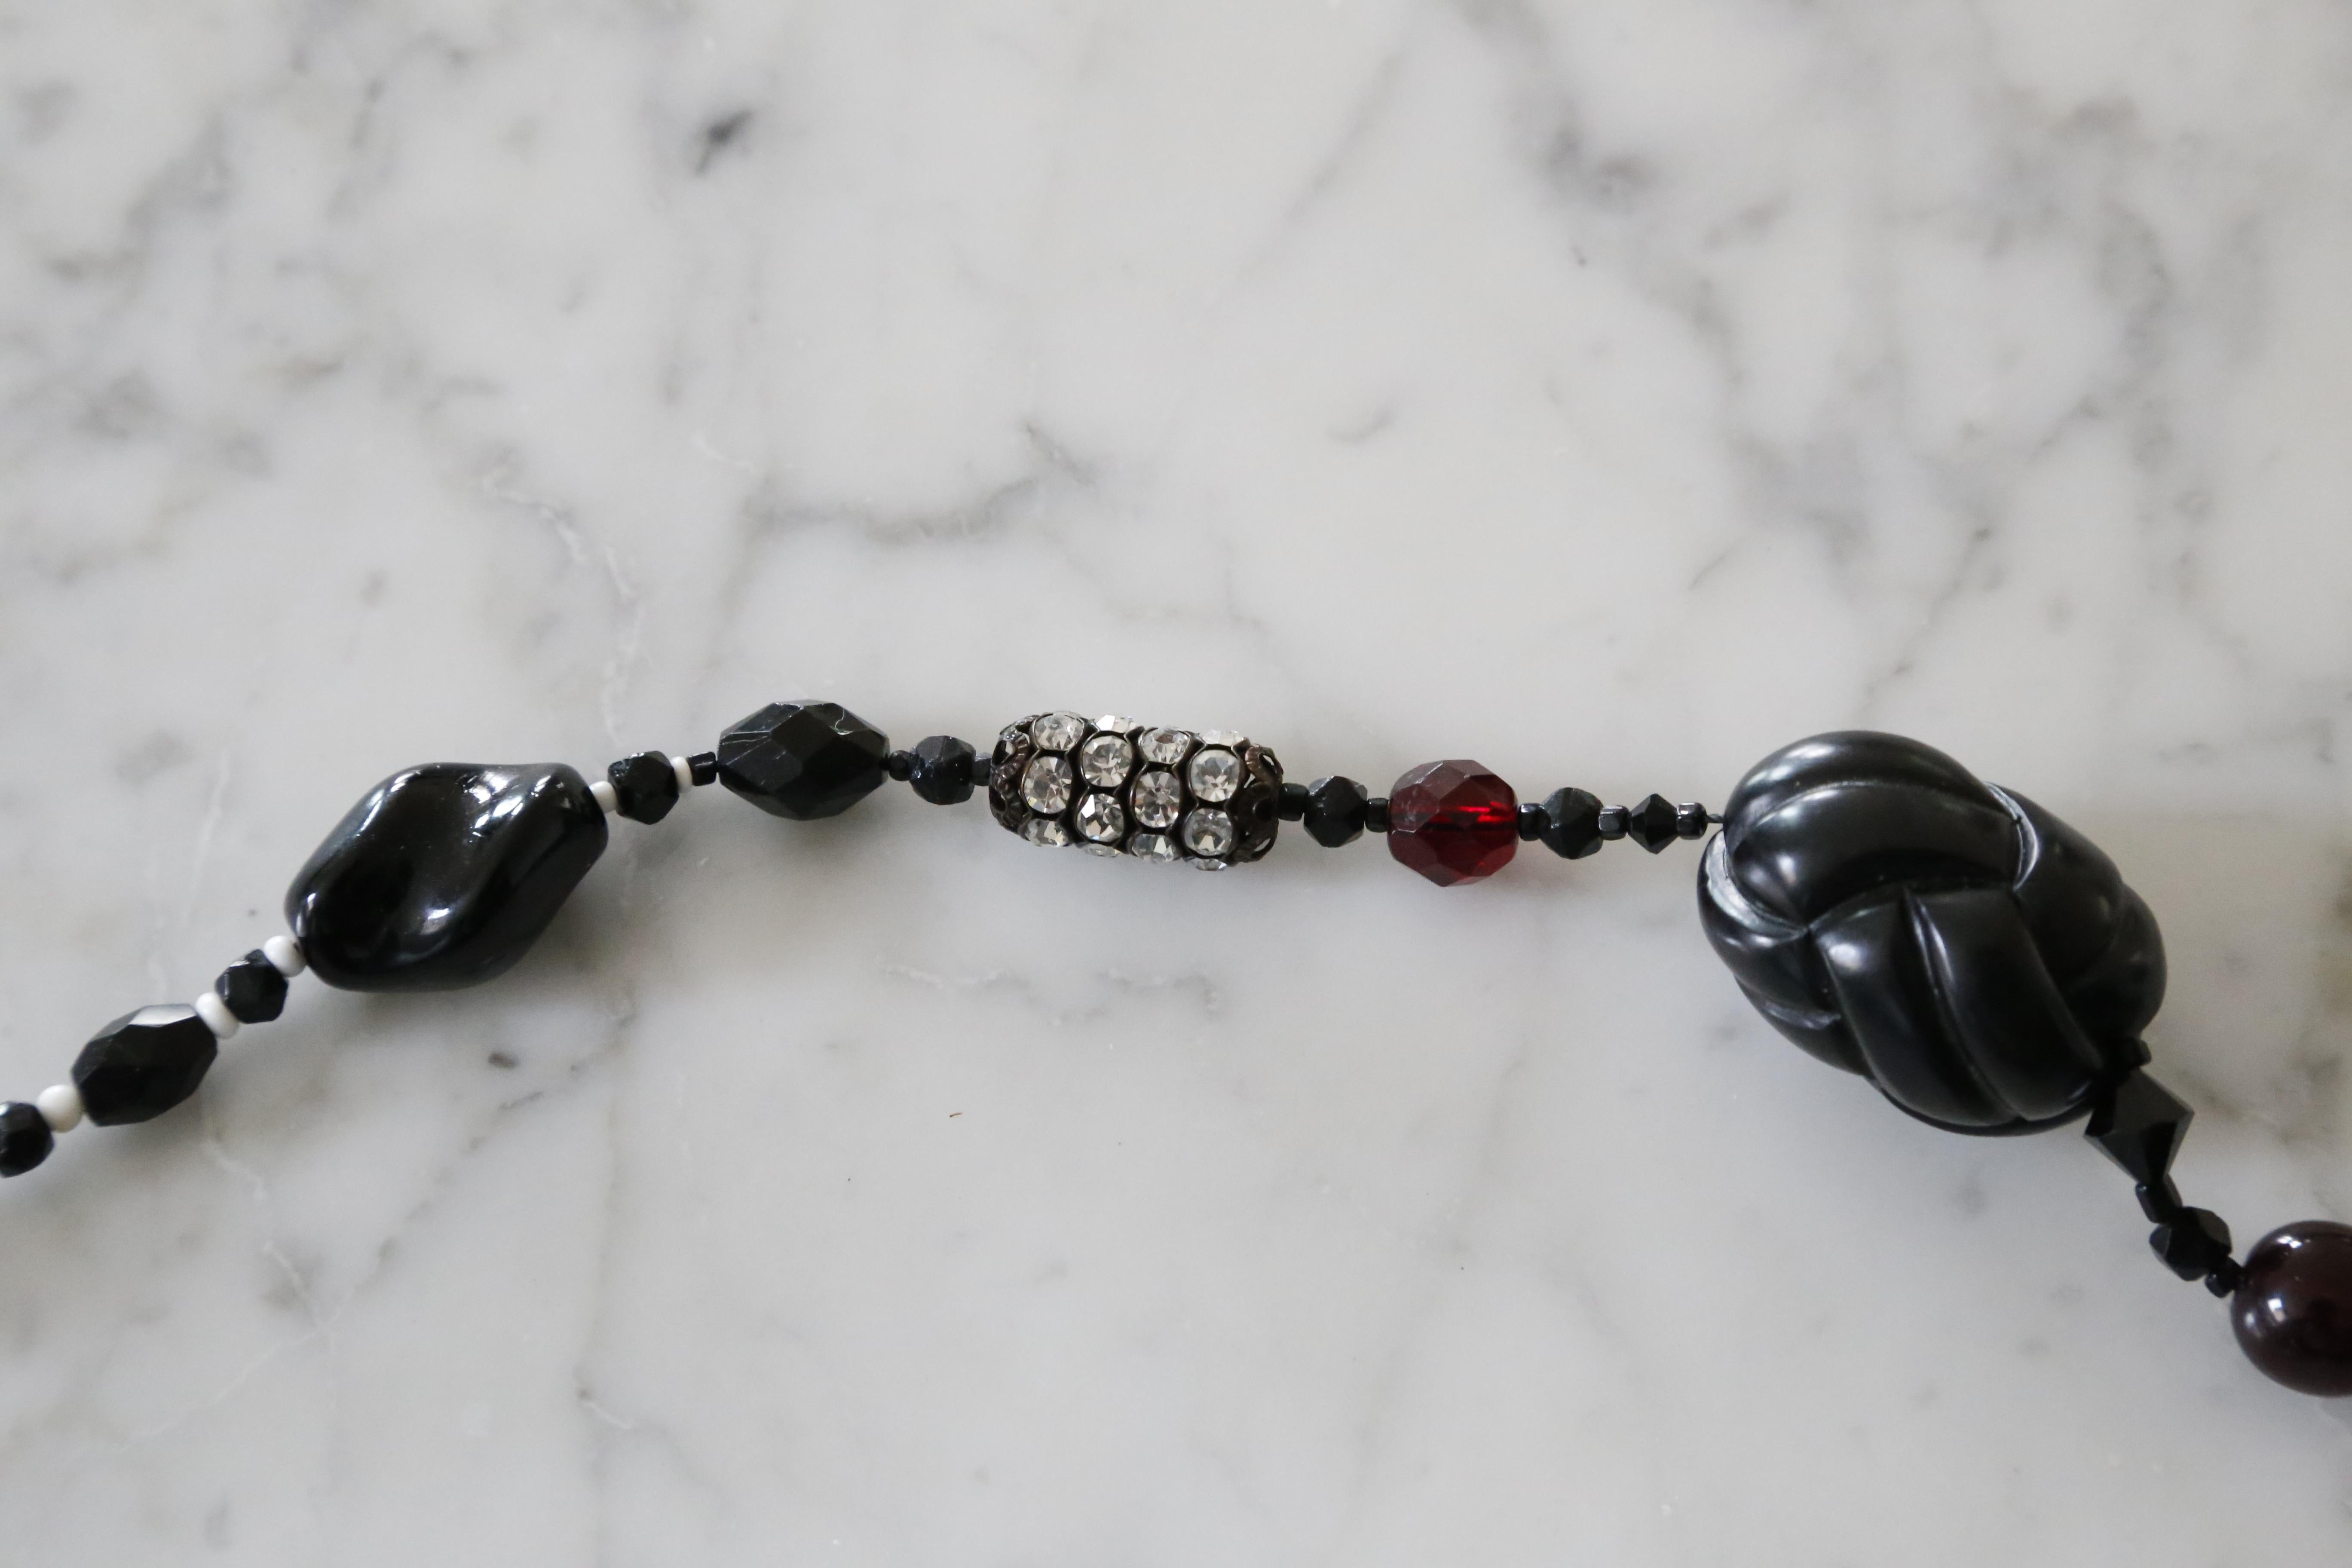 Unique Czech crystal and black glass Art Deco Sautoir necklace dating to the 1920's. Length is 54